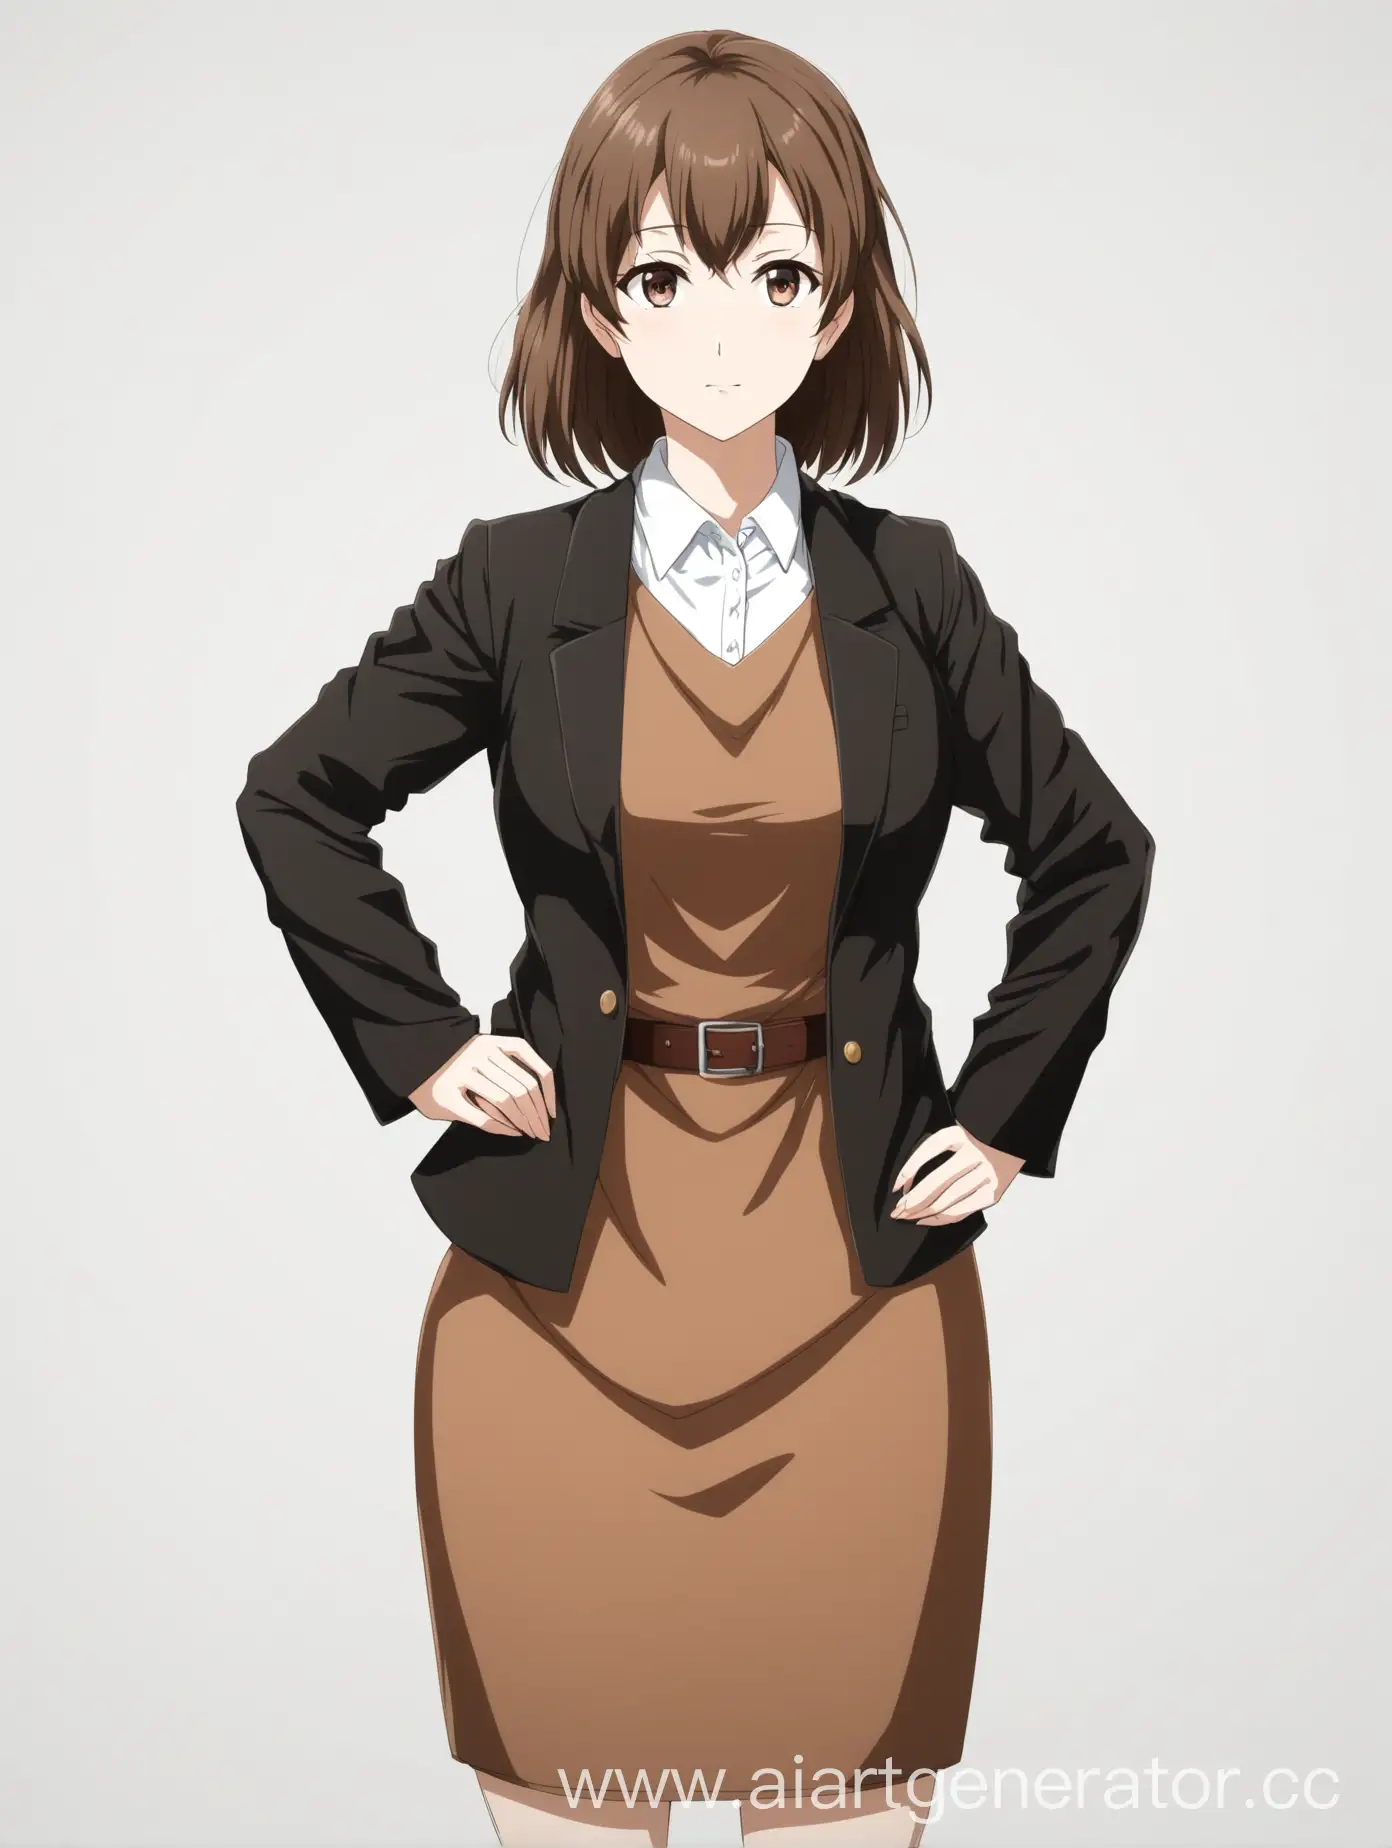 Anime-Woman-Teacher-in-Brown-Dress-and-Black-Jacket-University-Academic-Isolation